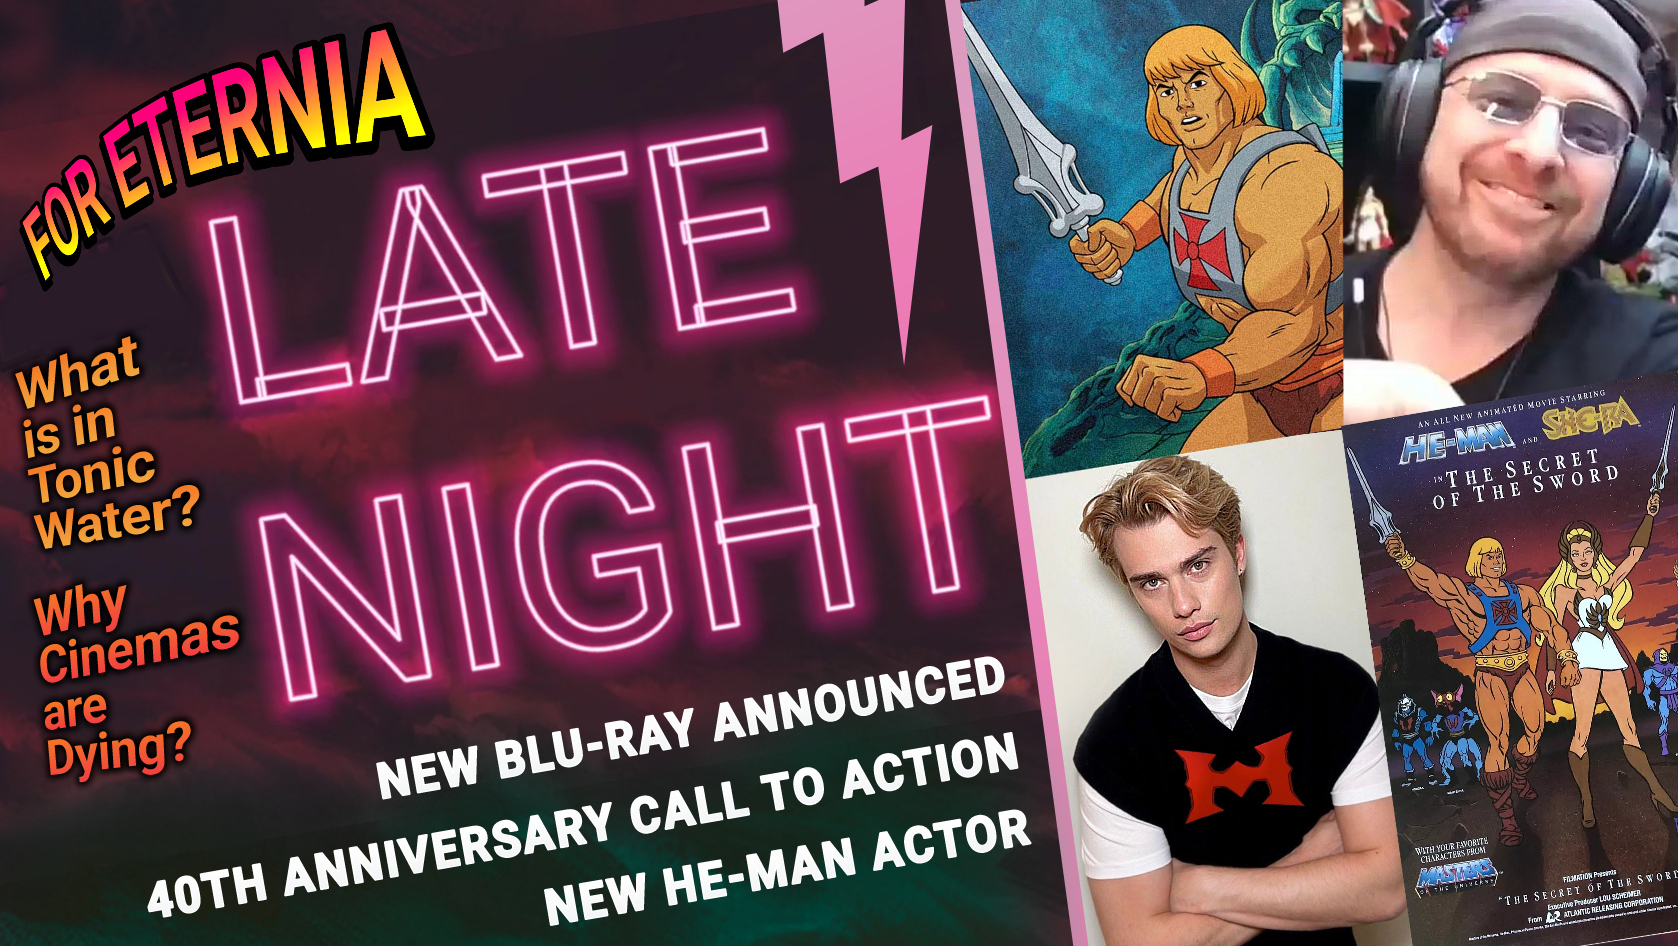 FOR ETERNIA LATE NIGHT! Talking Nicholas Galitzine cast as He-Man in the new Masters of the Universe movie, the new He-Man Cartoon Blu-Ray & More!